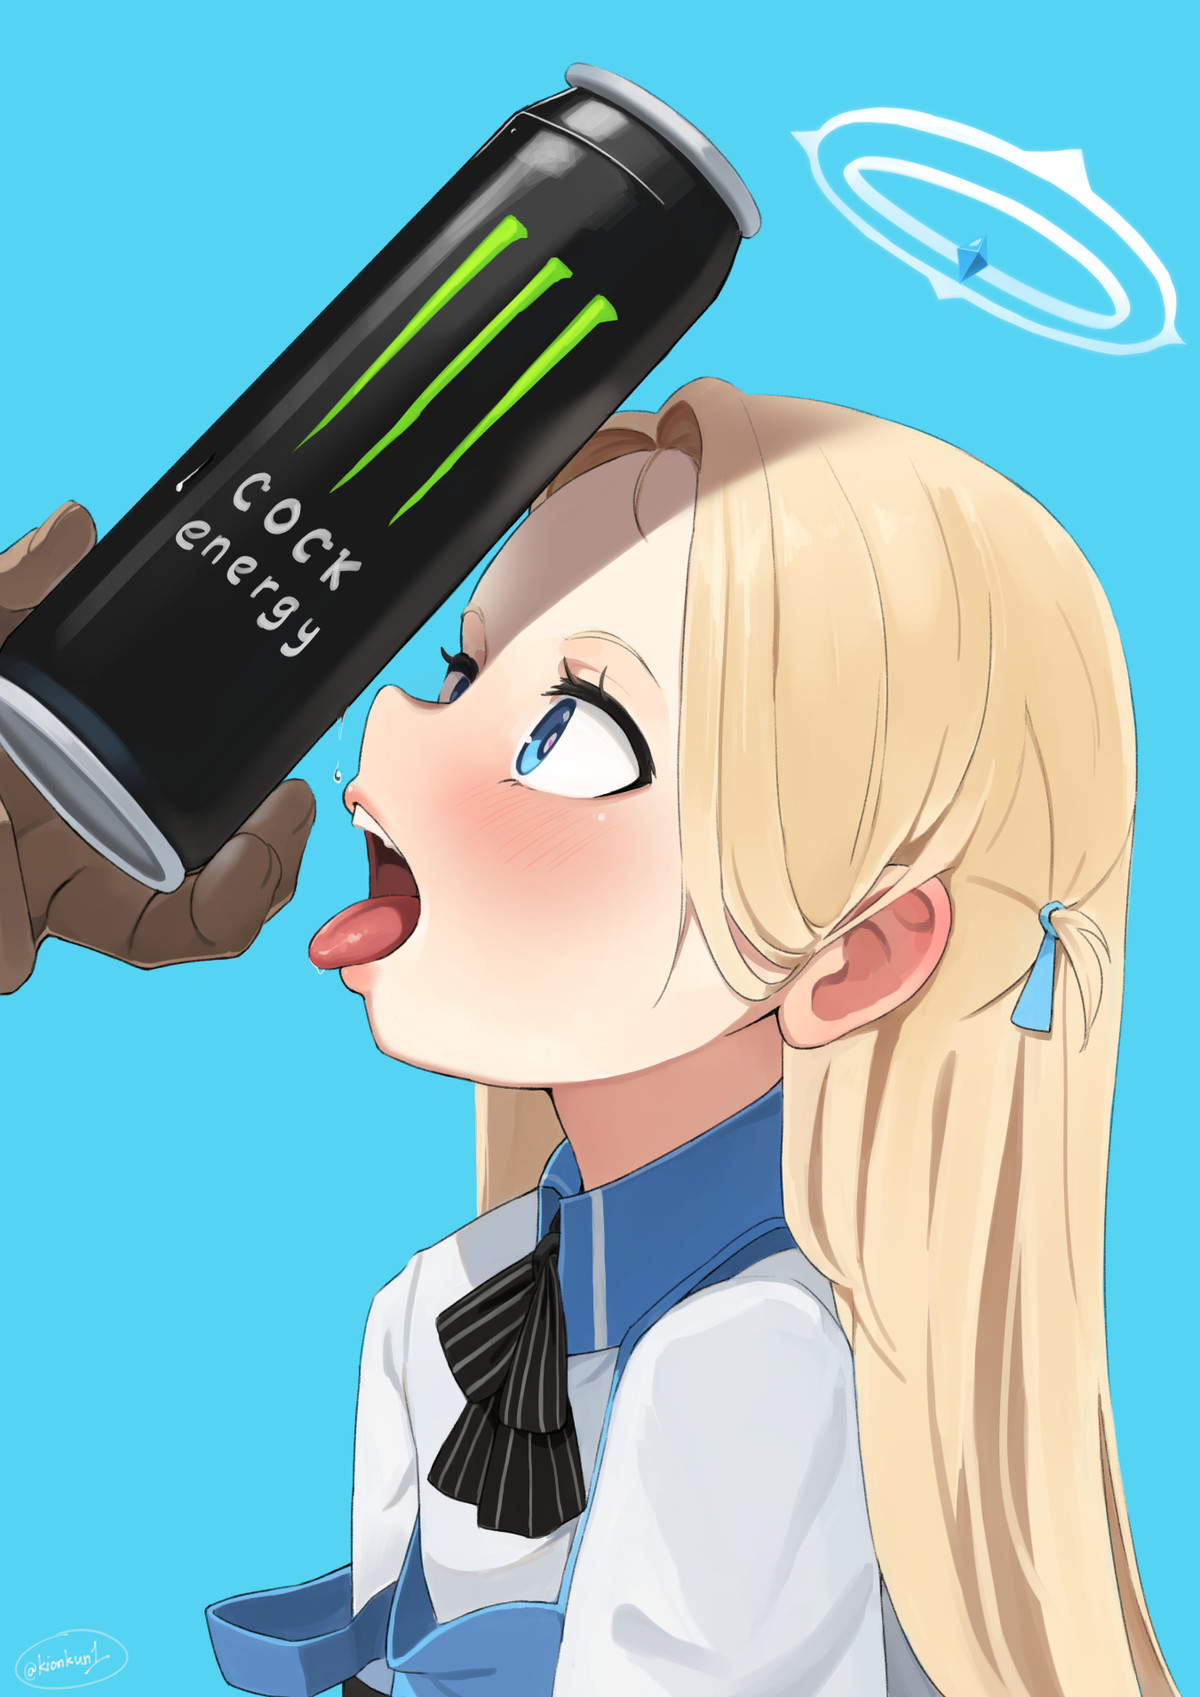 Energy drink. join list: AraSfwPosts (88 subs)Mention Clicks: 4709Msgs Sent: 2976Mention History.. this character is looking a bit young for anything relating to that